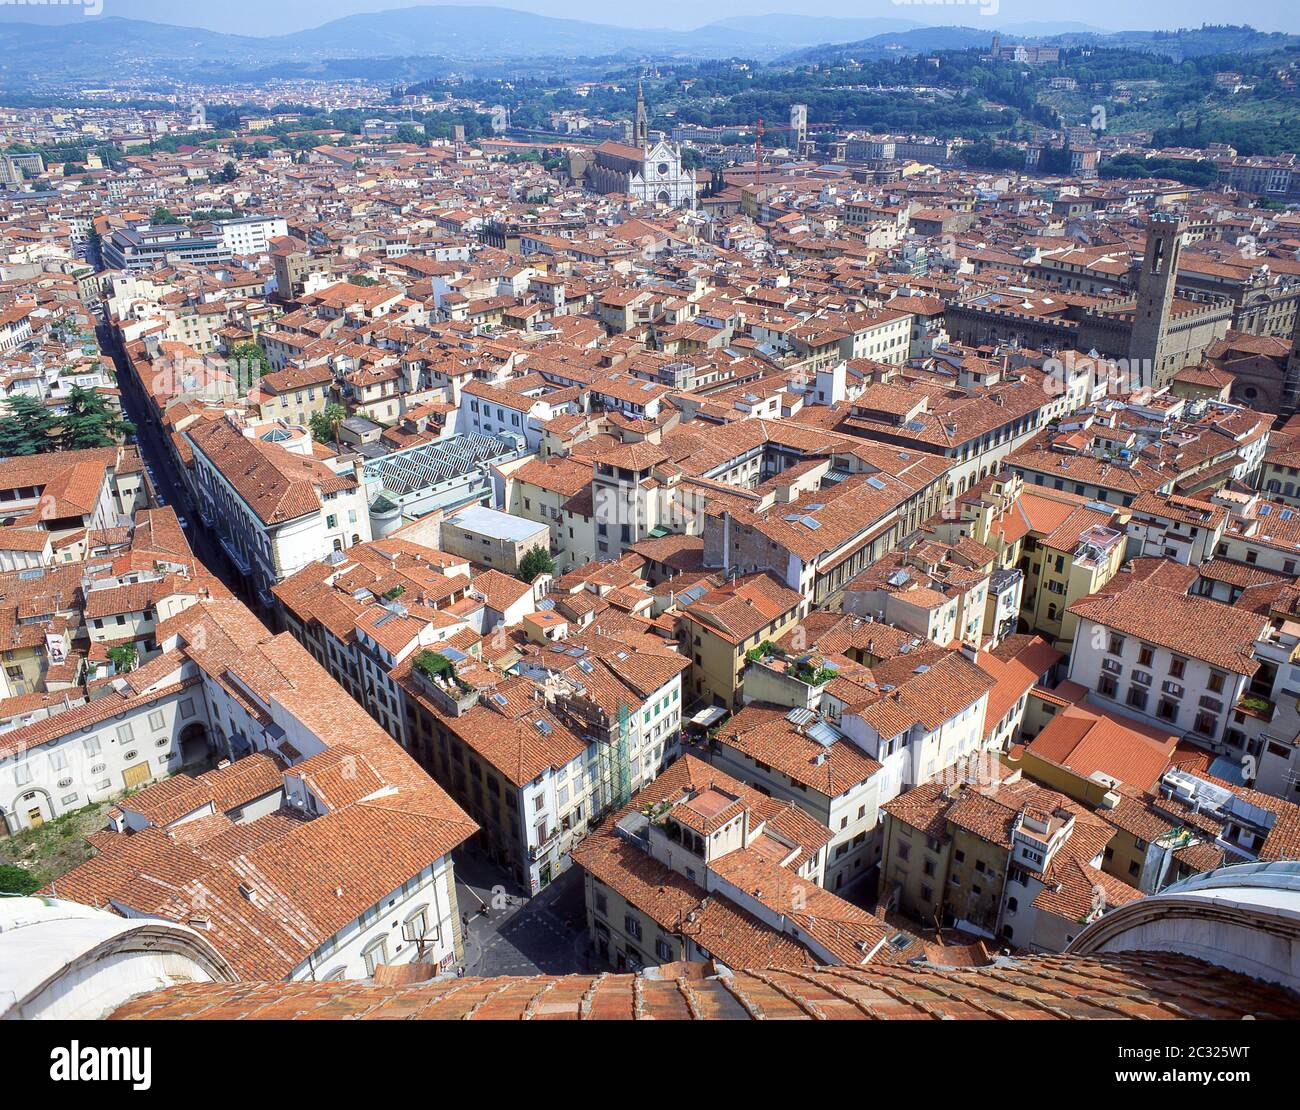 Panoramic view of Old Town from Cattedrale di Santa Maria del Fiore (Duomo), Florence (Firenze), Tuscany Region, Italy Stock Photo